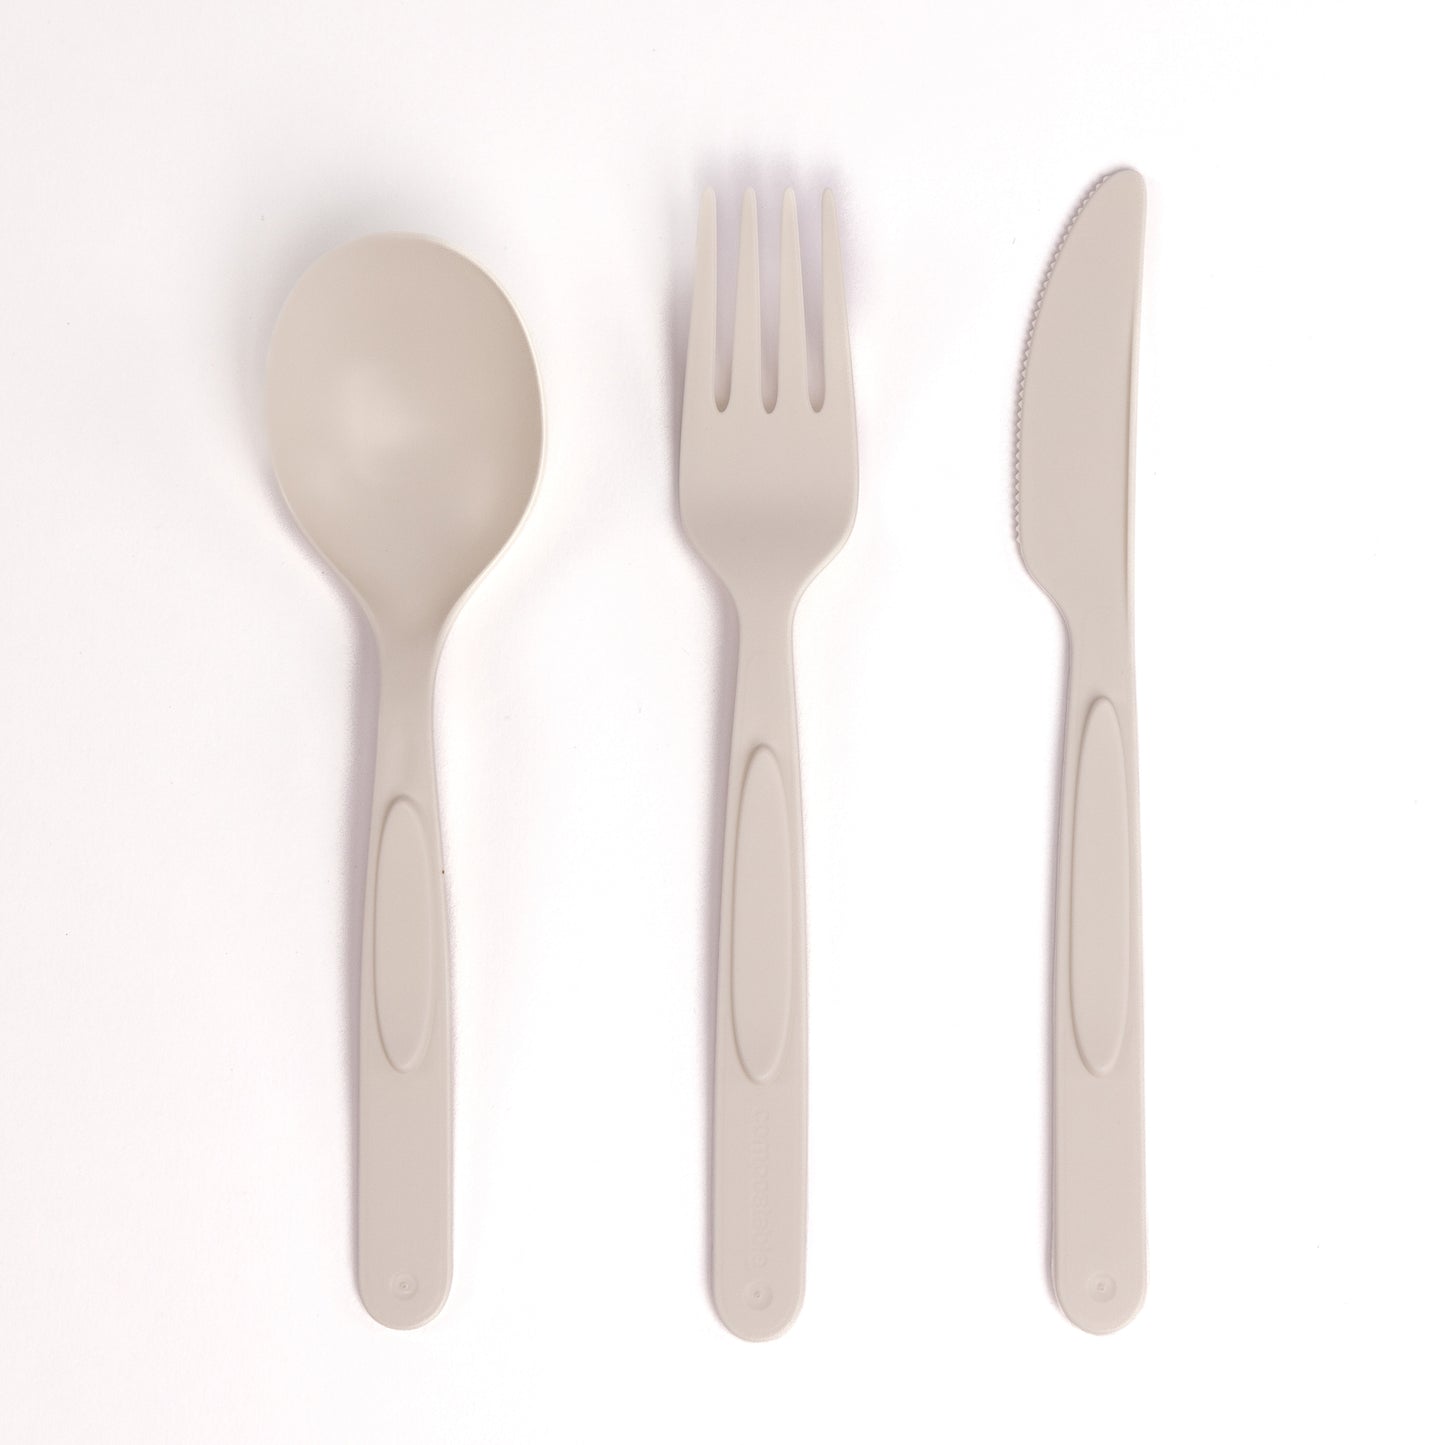 Matter Compostable Cutlery - Assorted Pack 8-Forks/8-Spoons/8-Knives - 24 Count